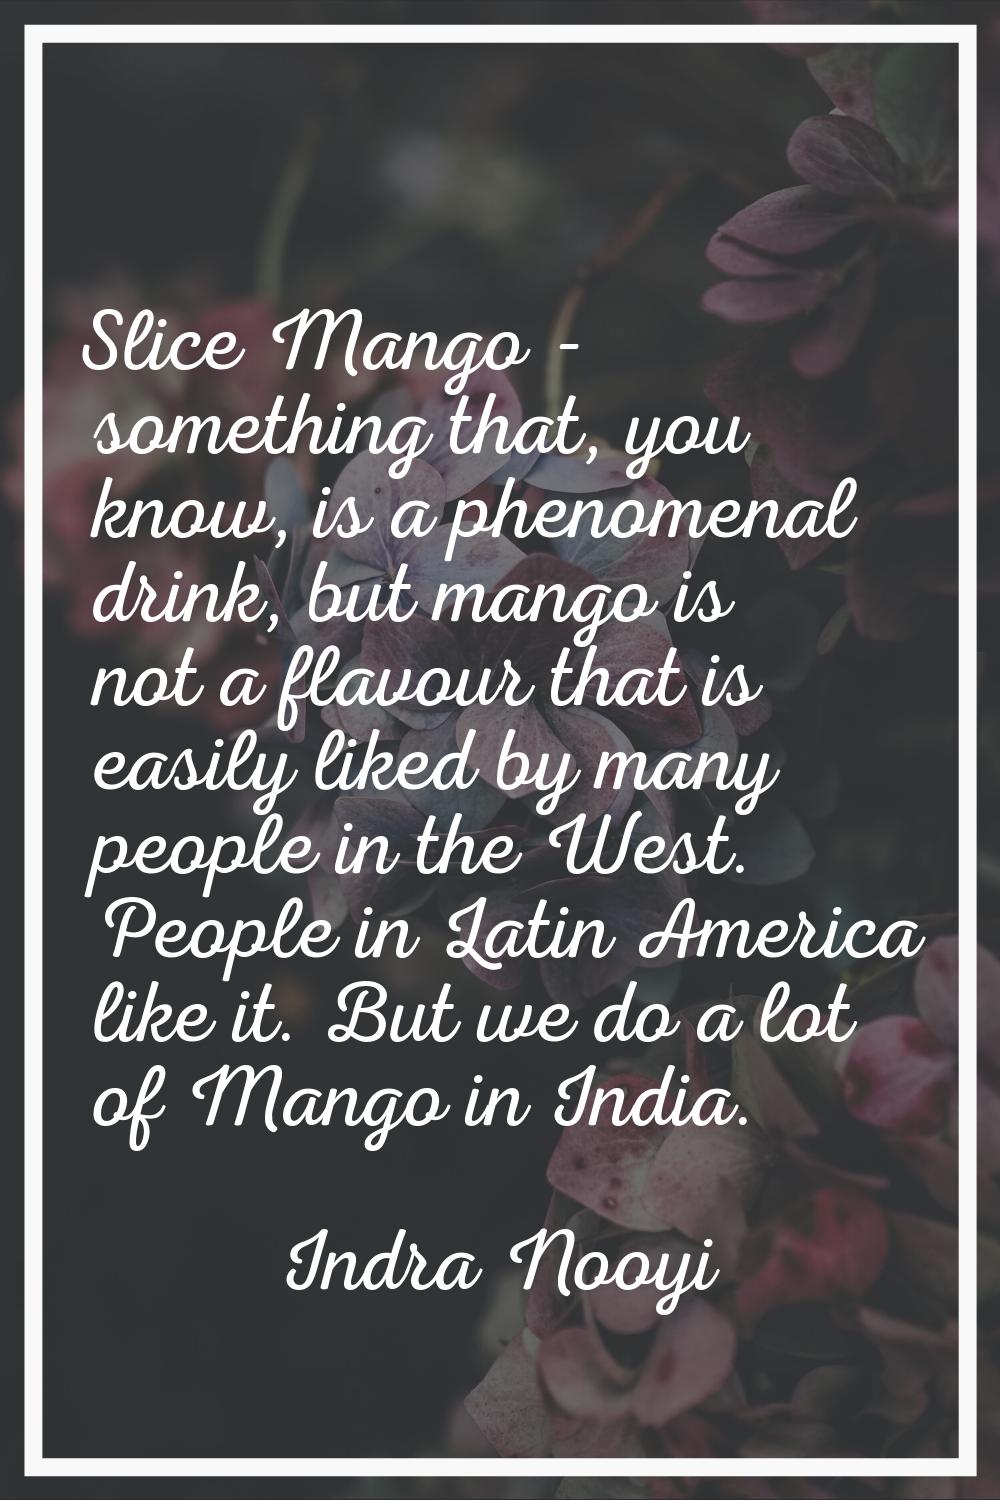 Slice Mango - something that, you know, is a phenomenal drink, but mango is not a flavour that is e